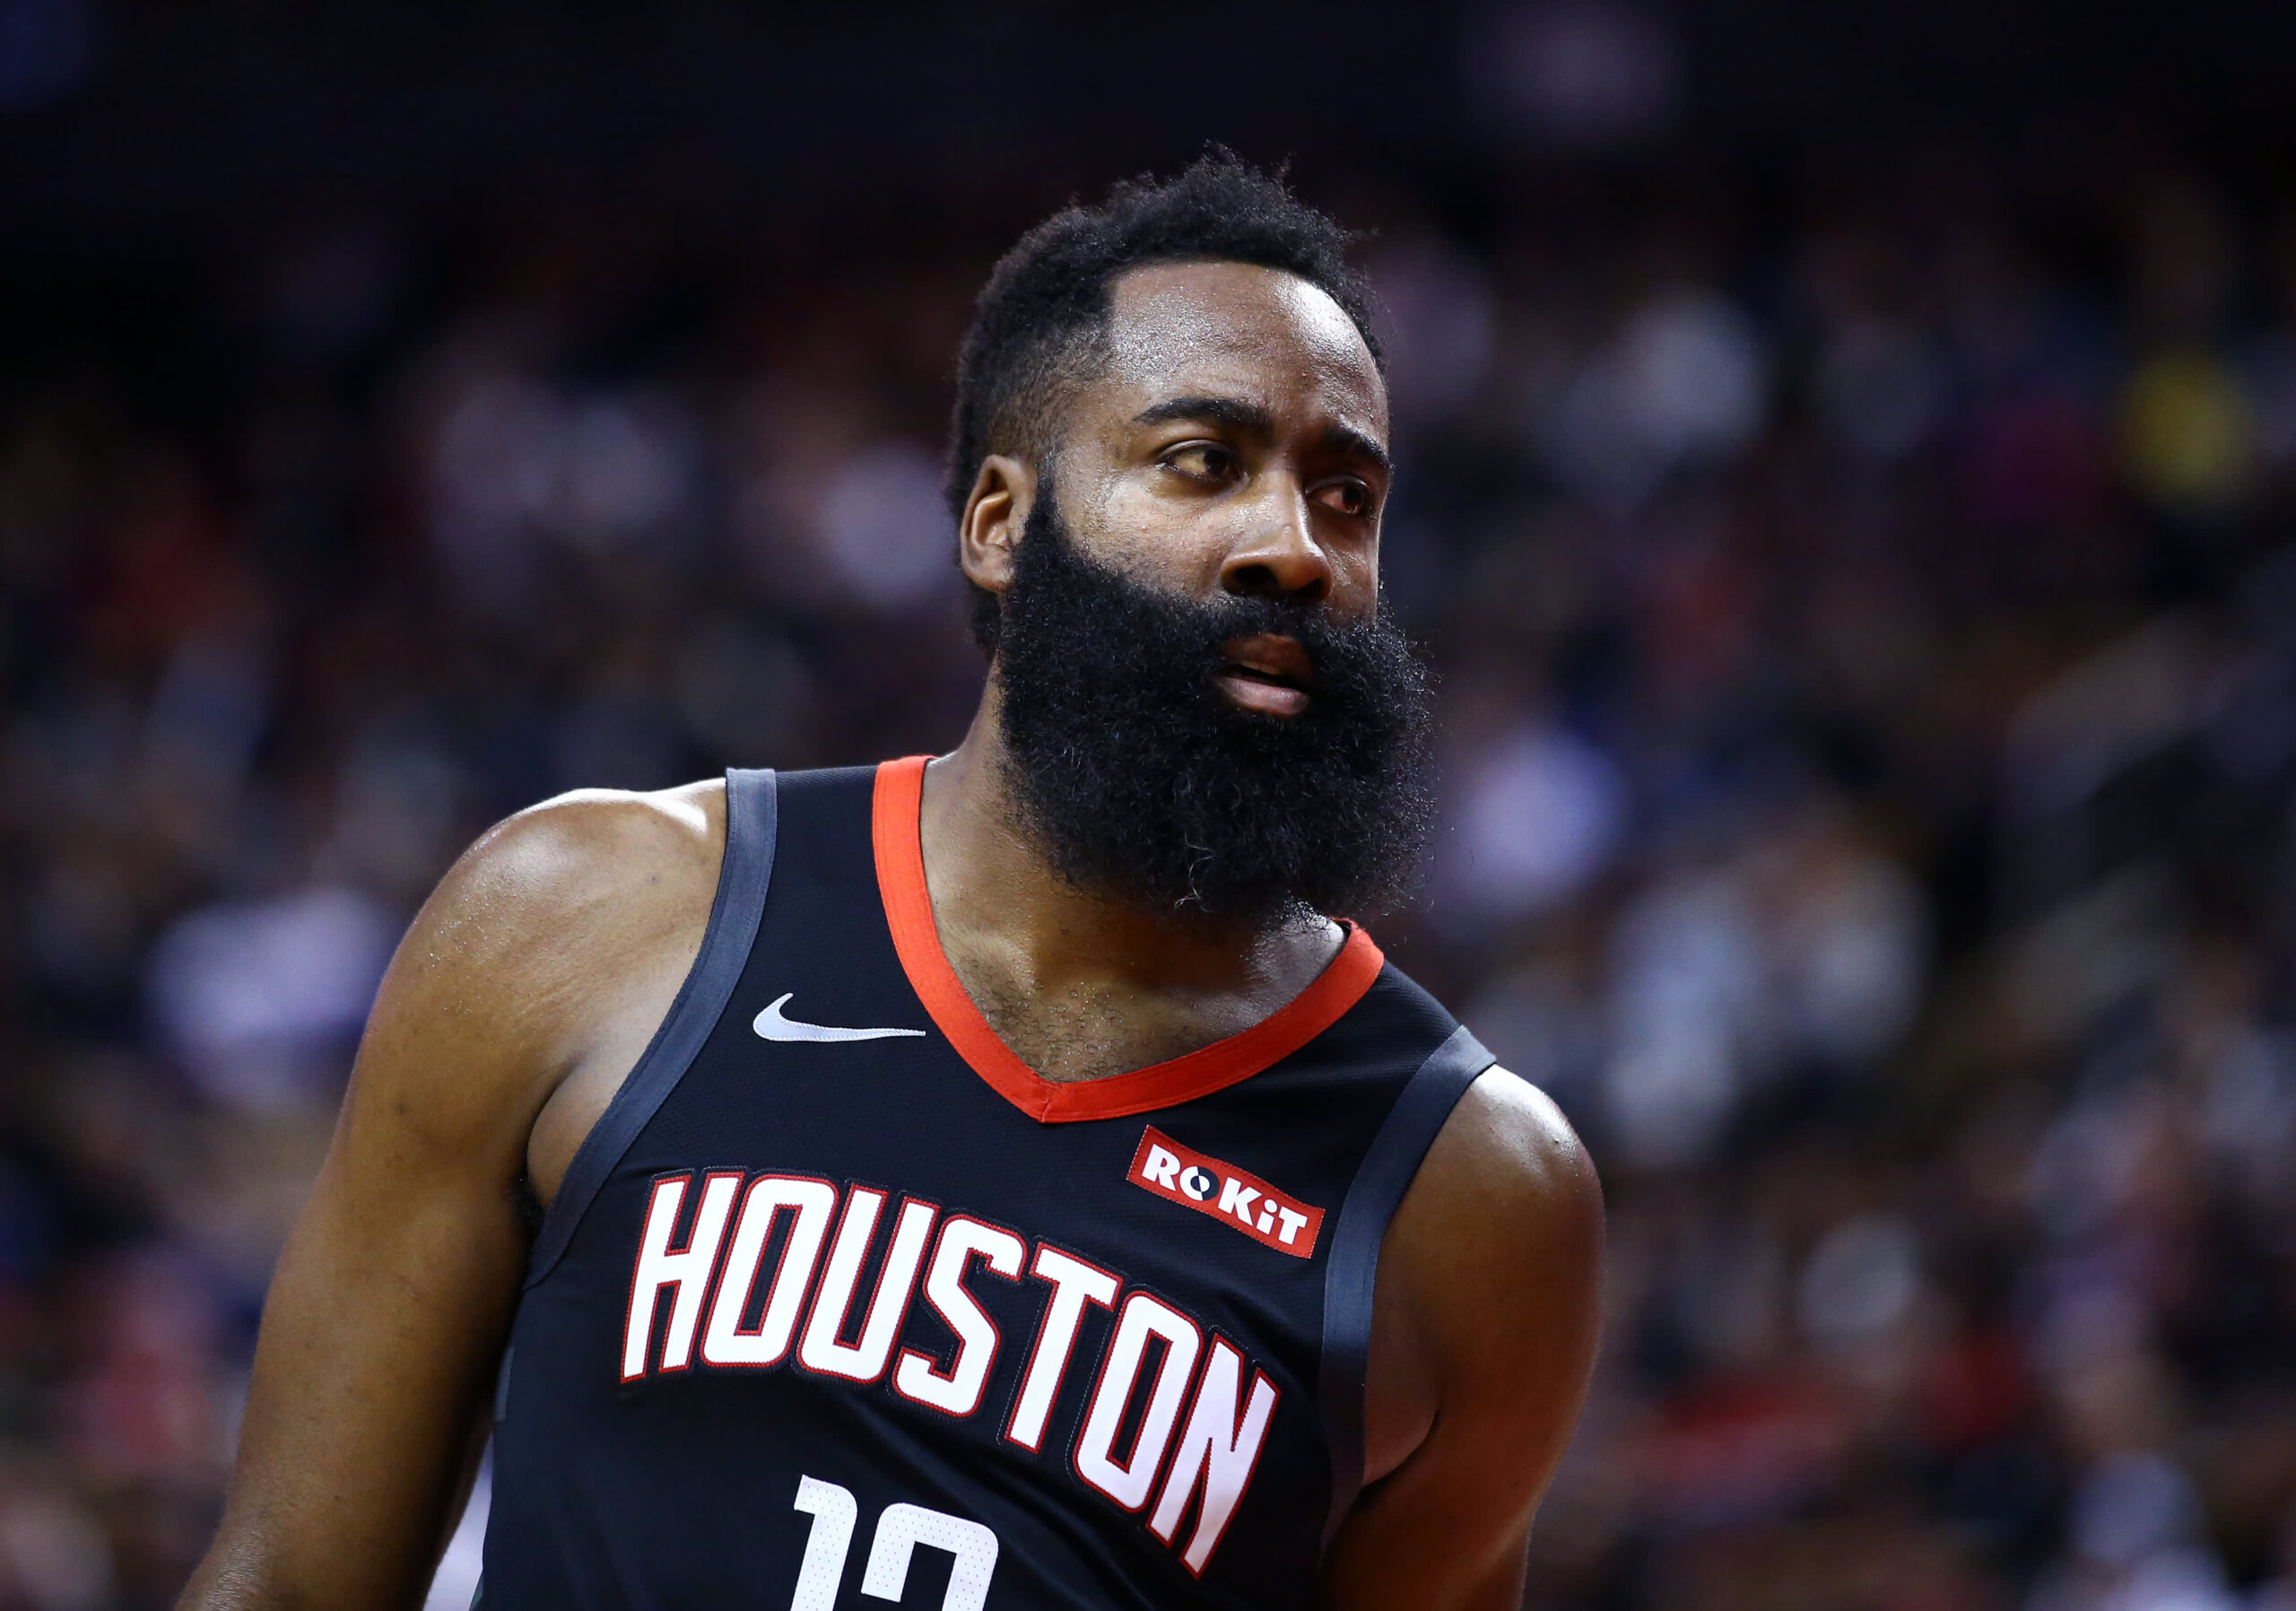 Lakers to Acquire Sixers' Star Guard James Harden in an Epic Trade Deal